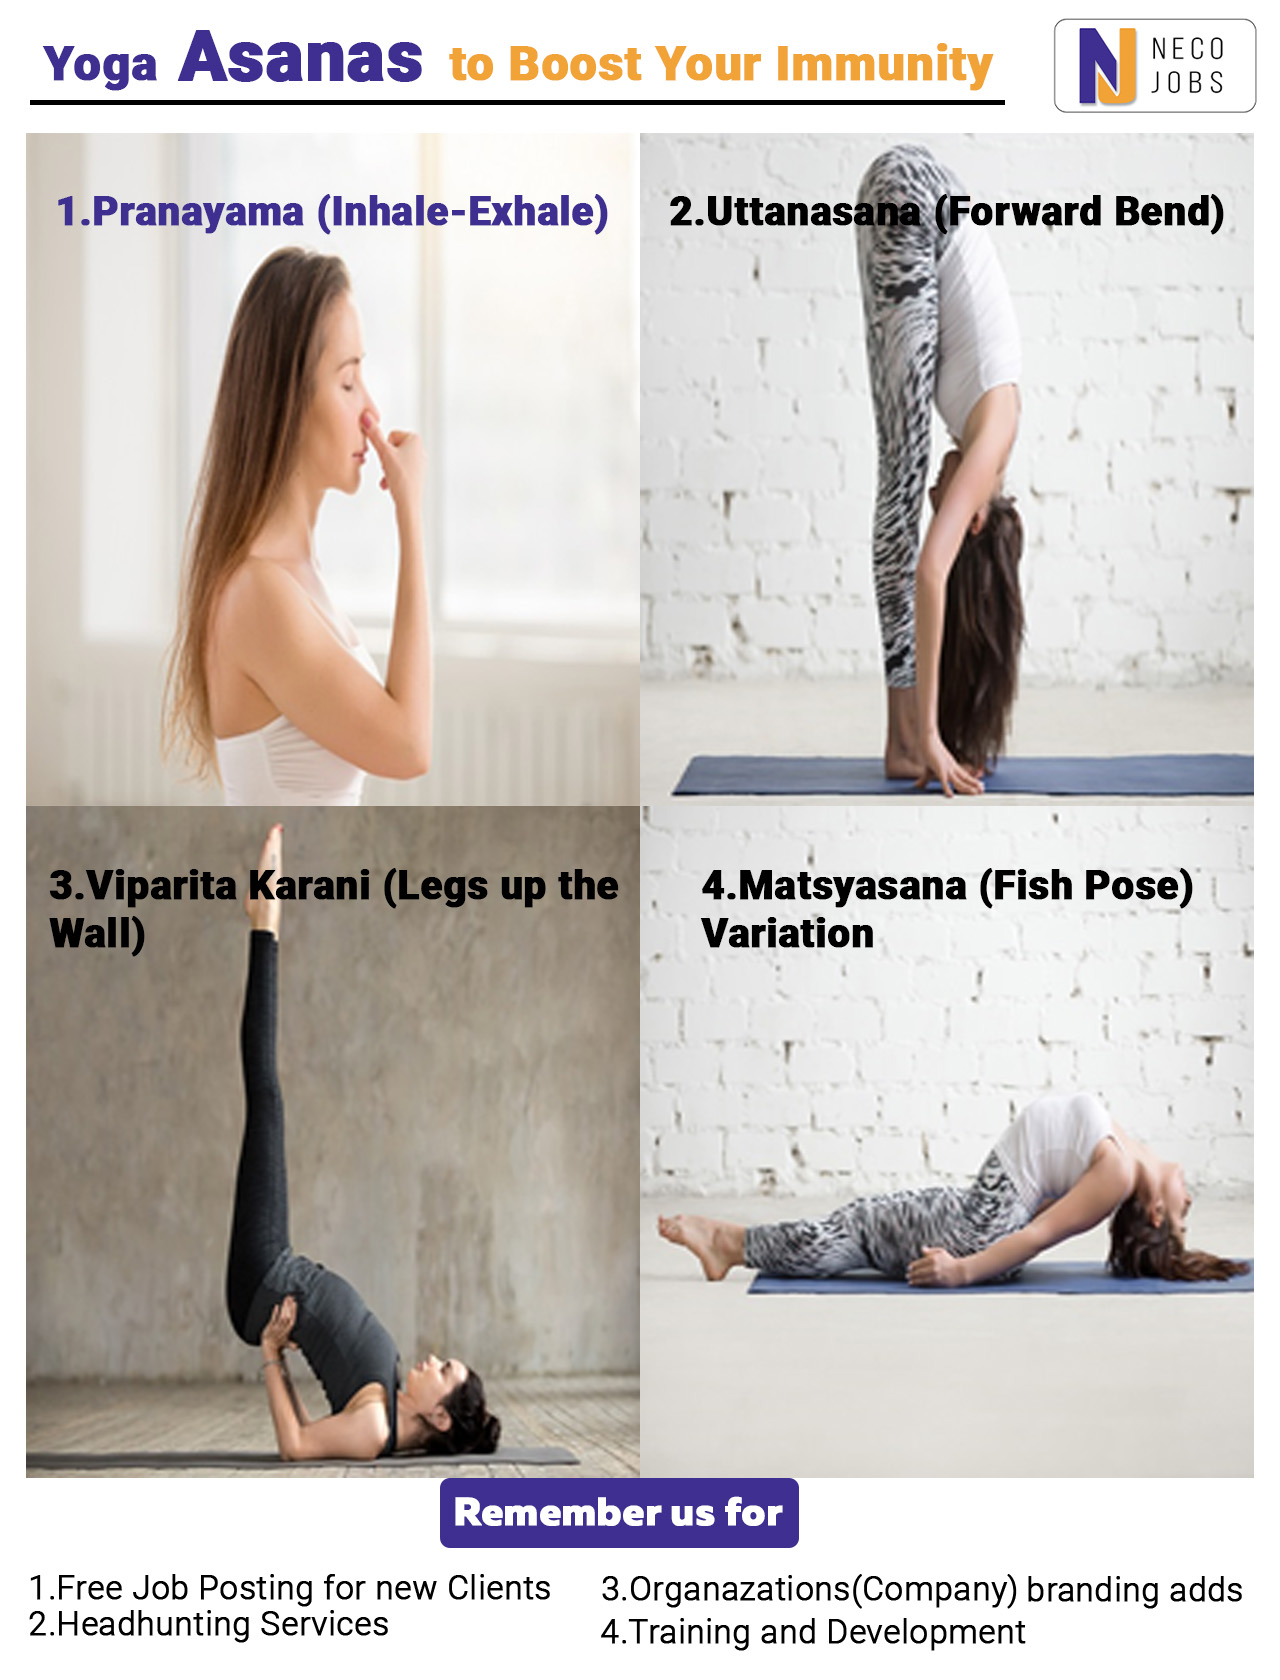 9 Yoga Poses For Immunity: Poses And Step To Do